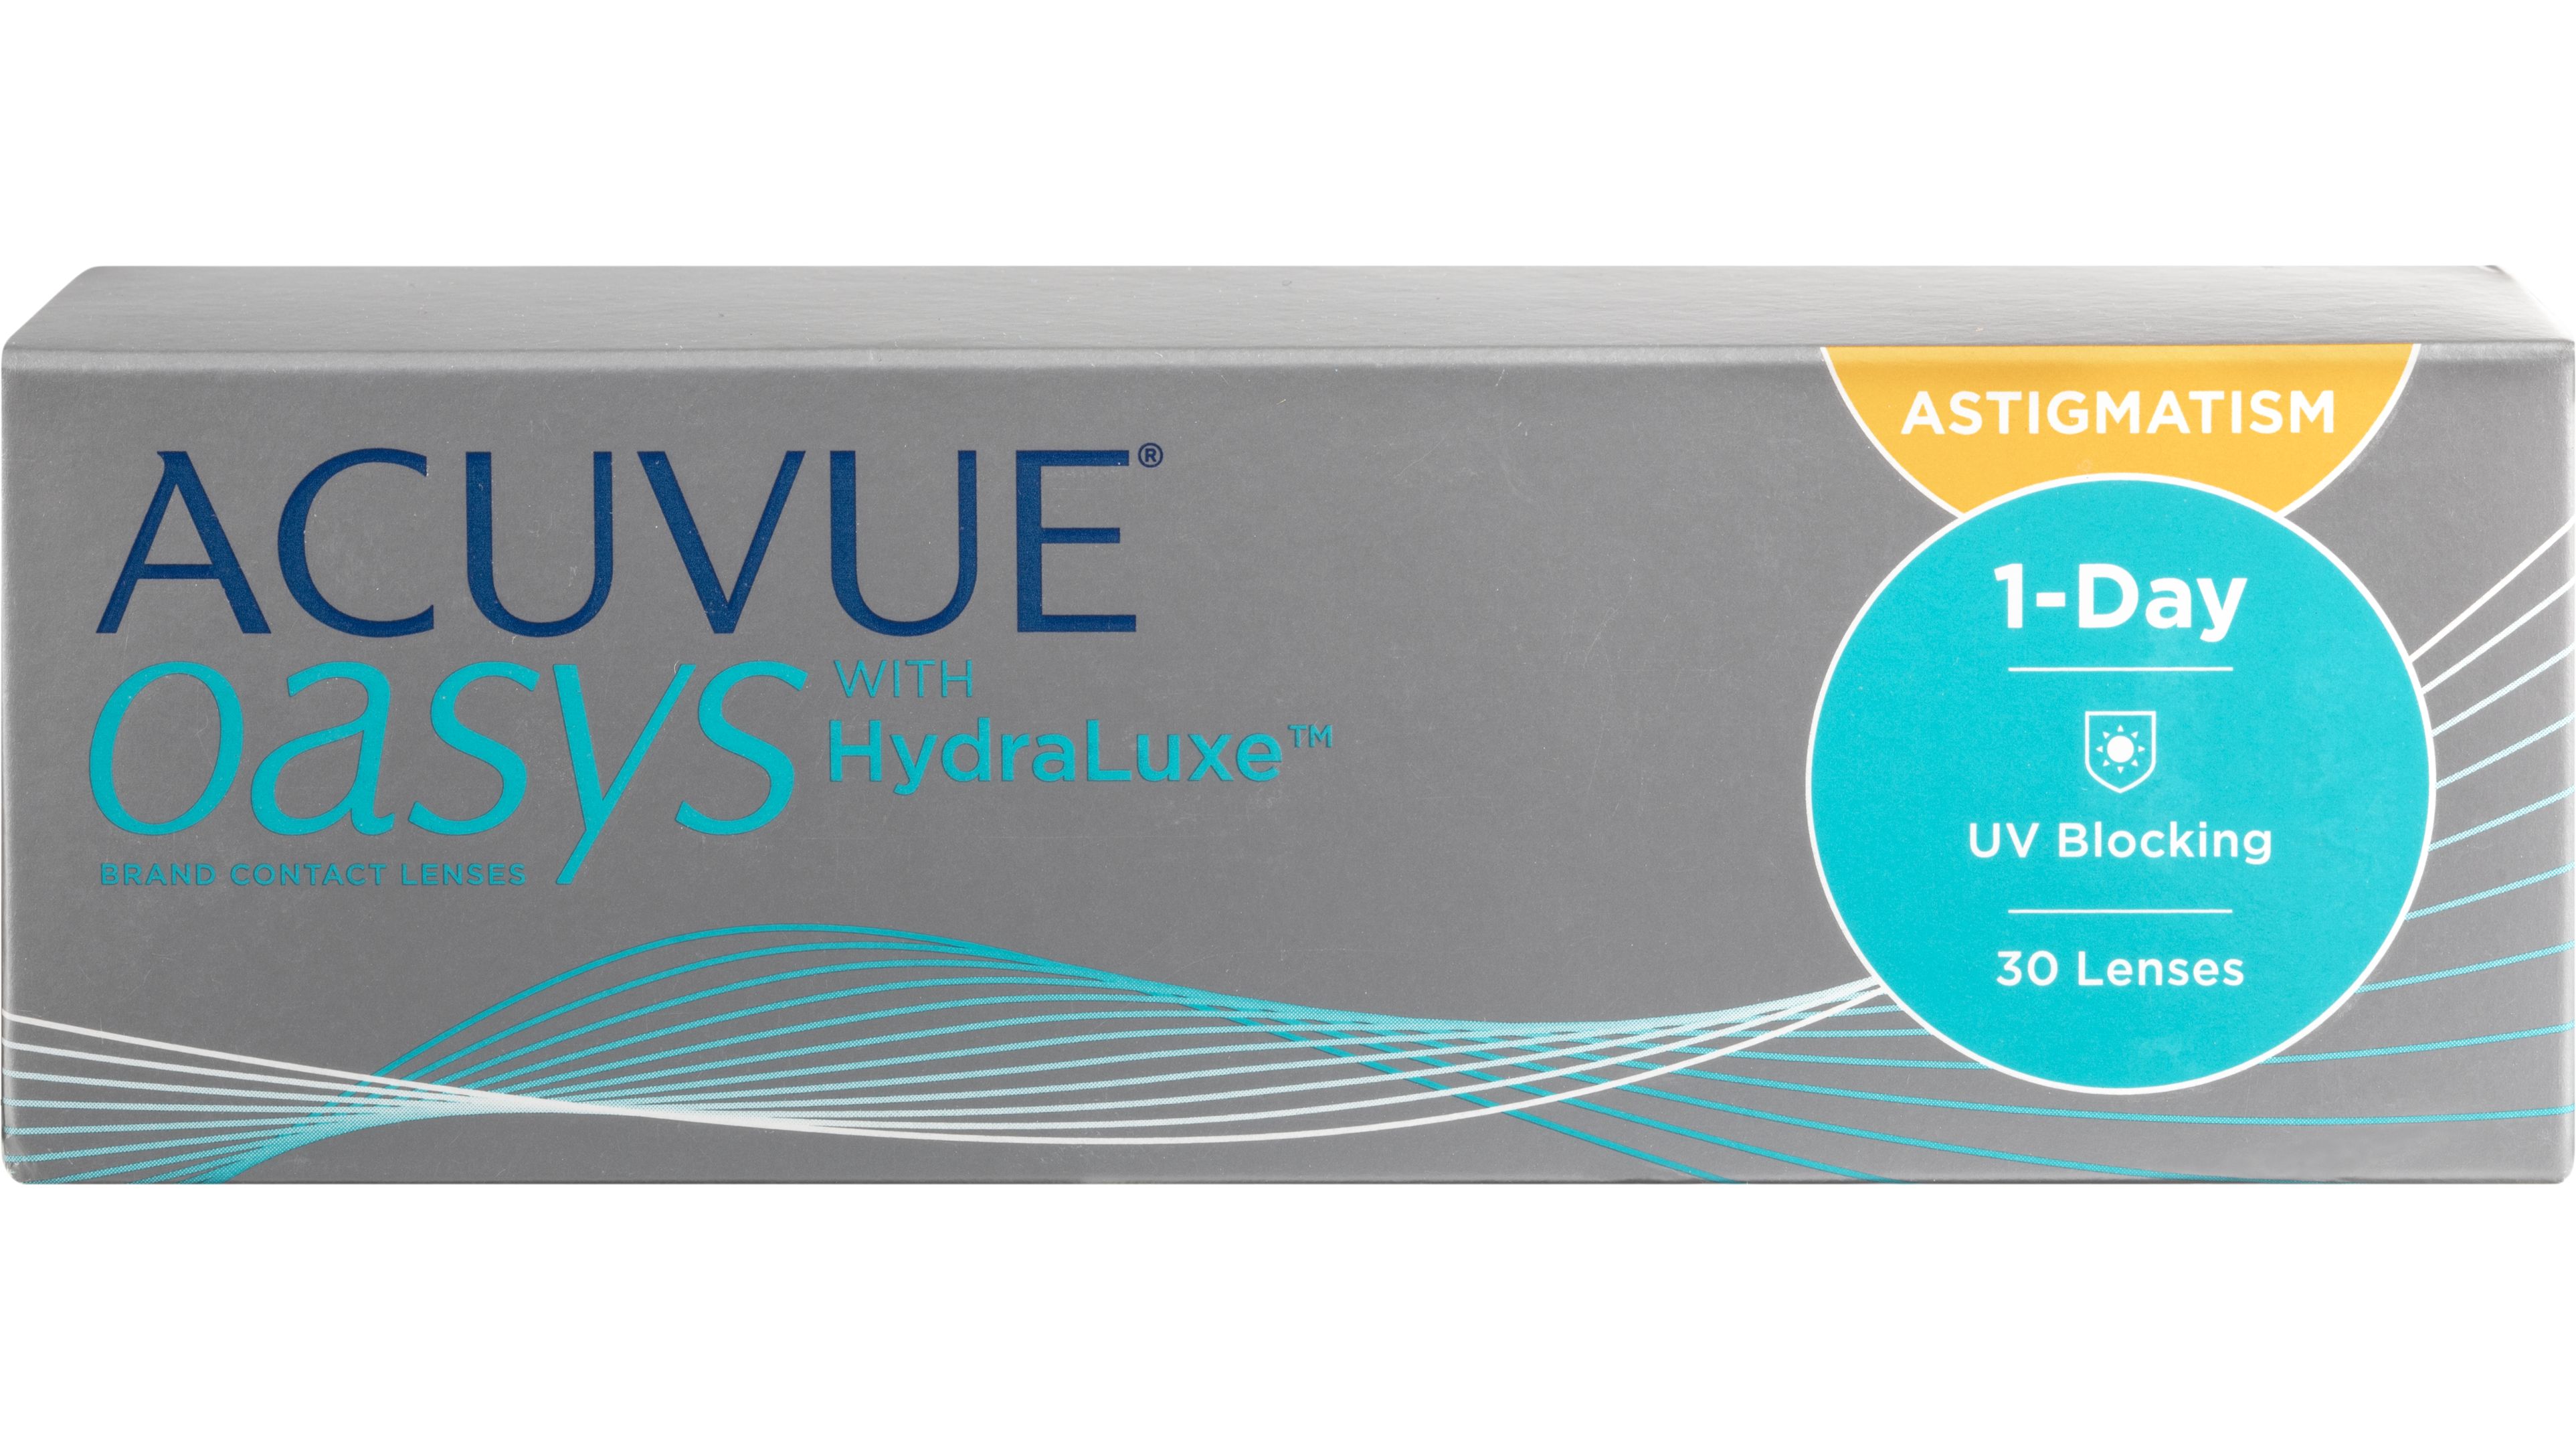 Front 1 Day Acuvue Oasys for Astigmatism